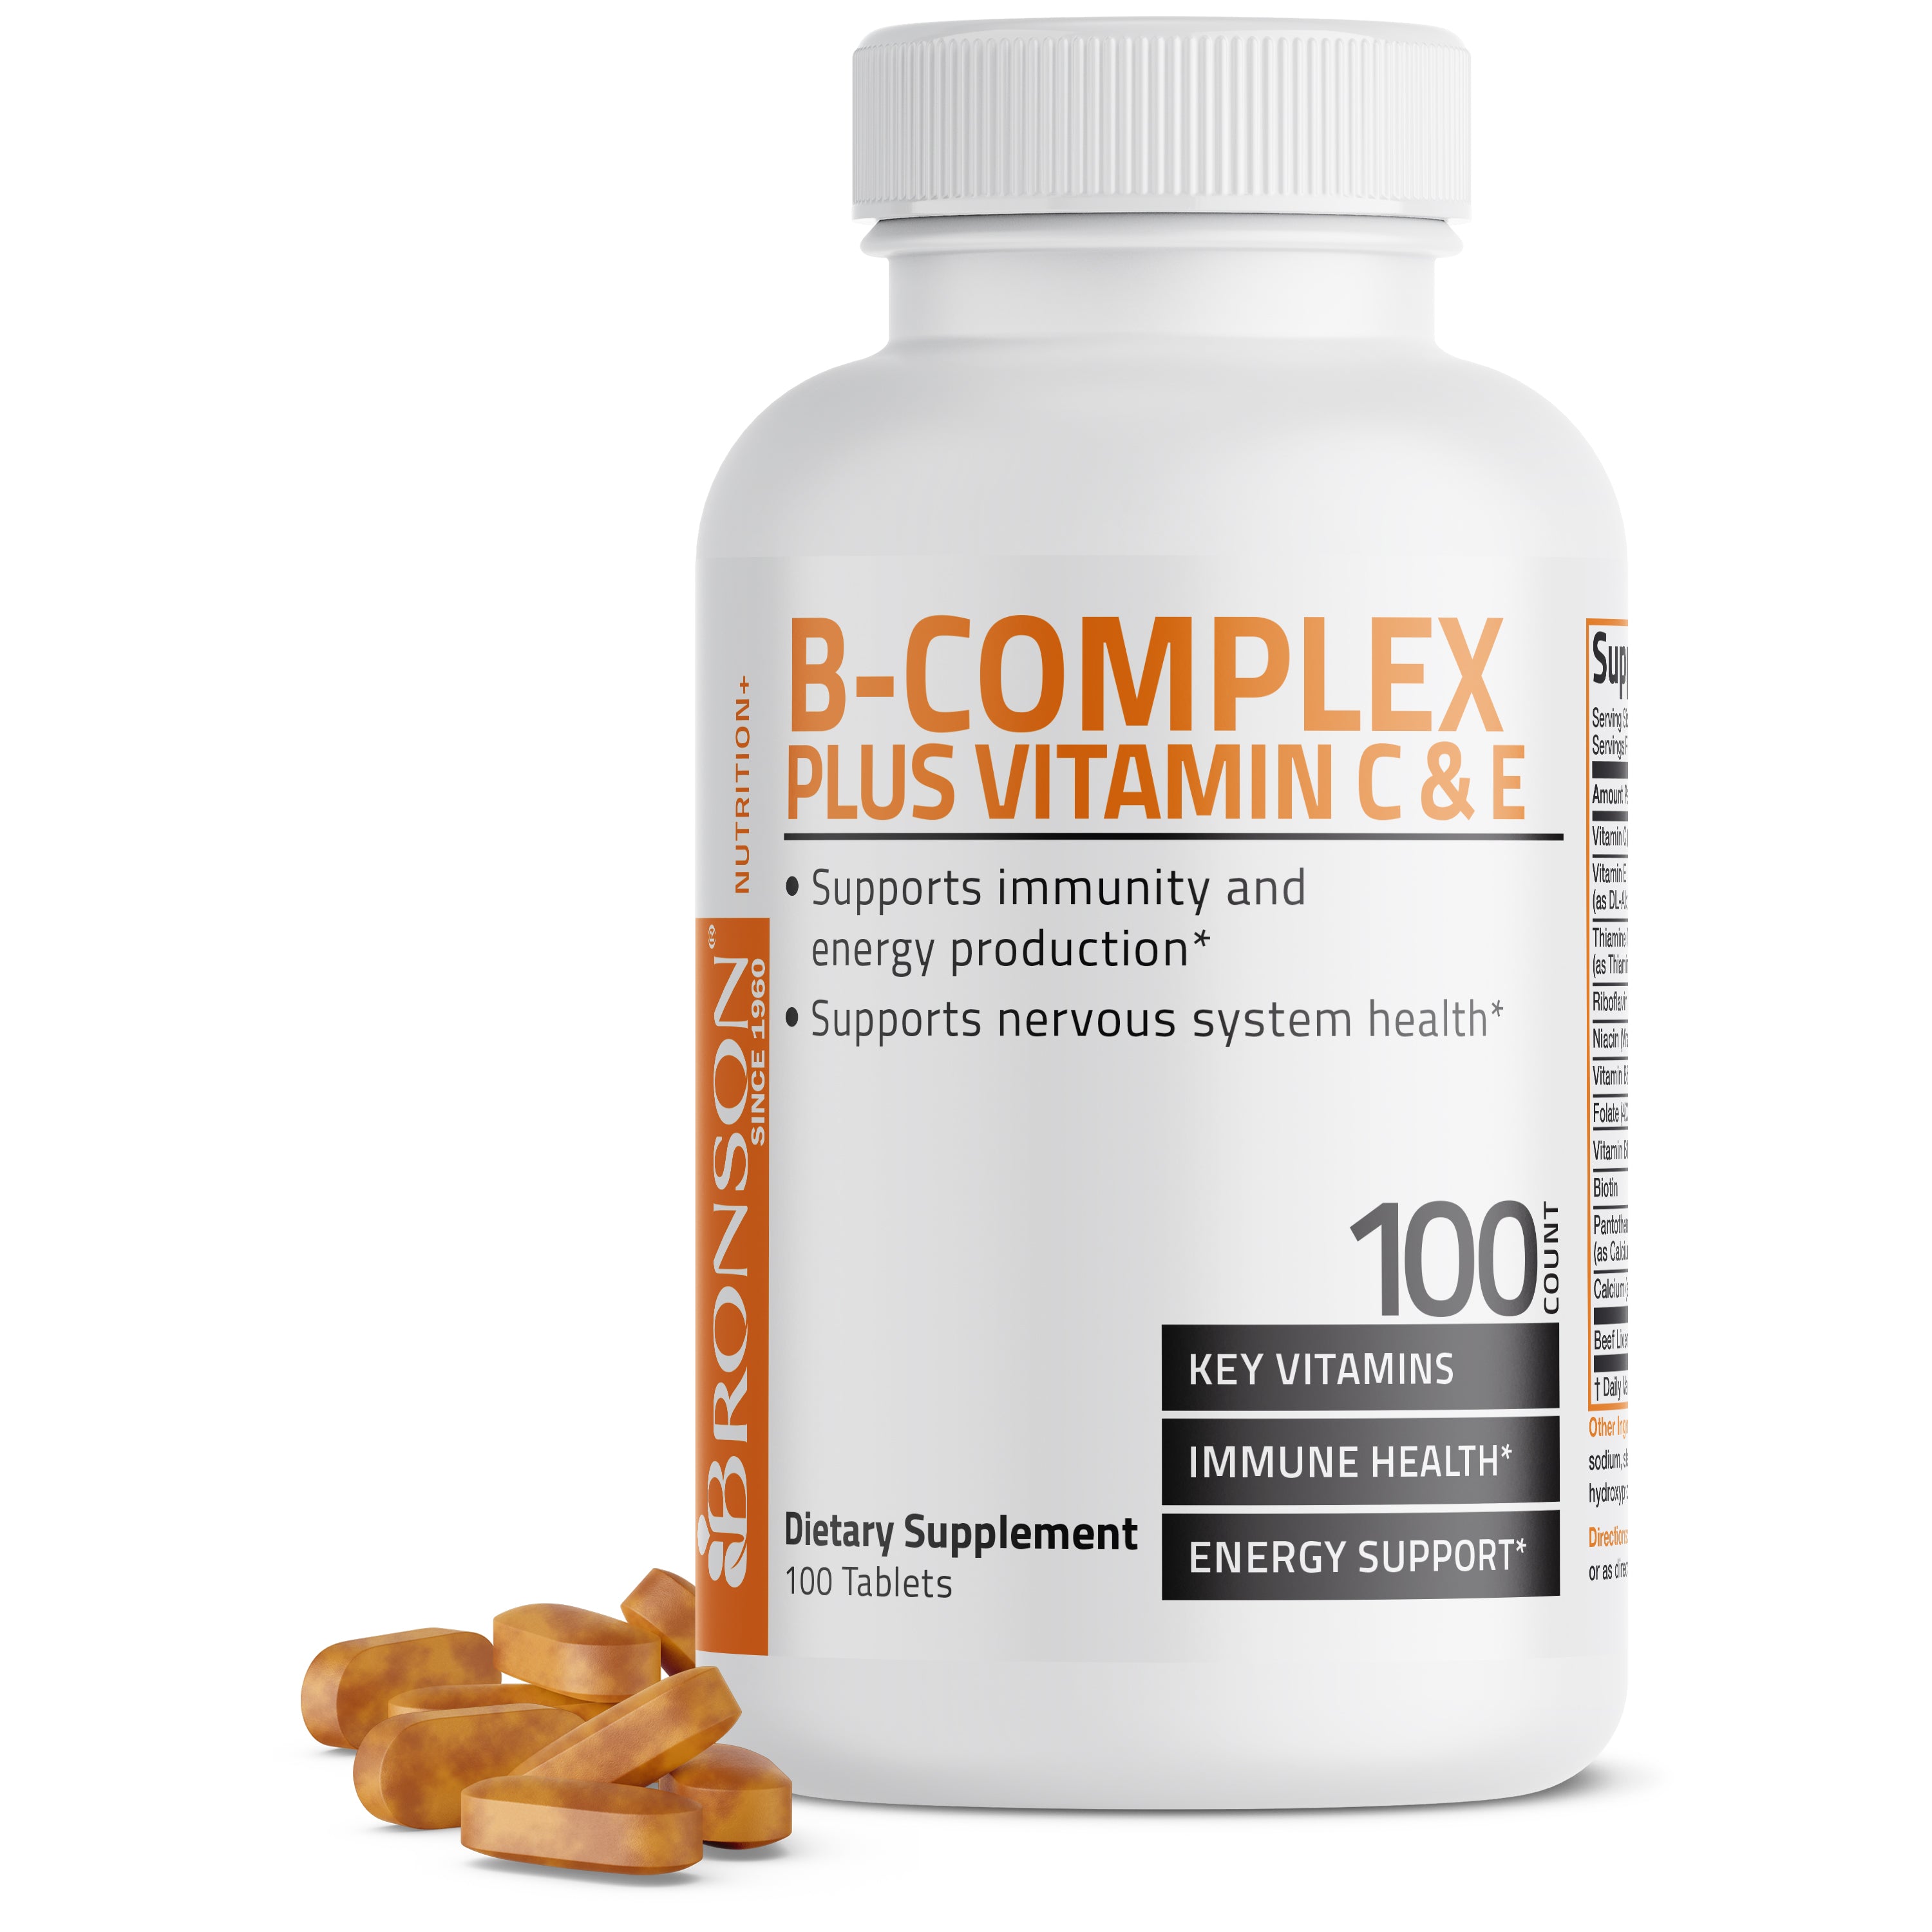 Vitamin B-Complex with Vitamins C and E - 100 Tablets view 1 of 6